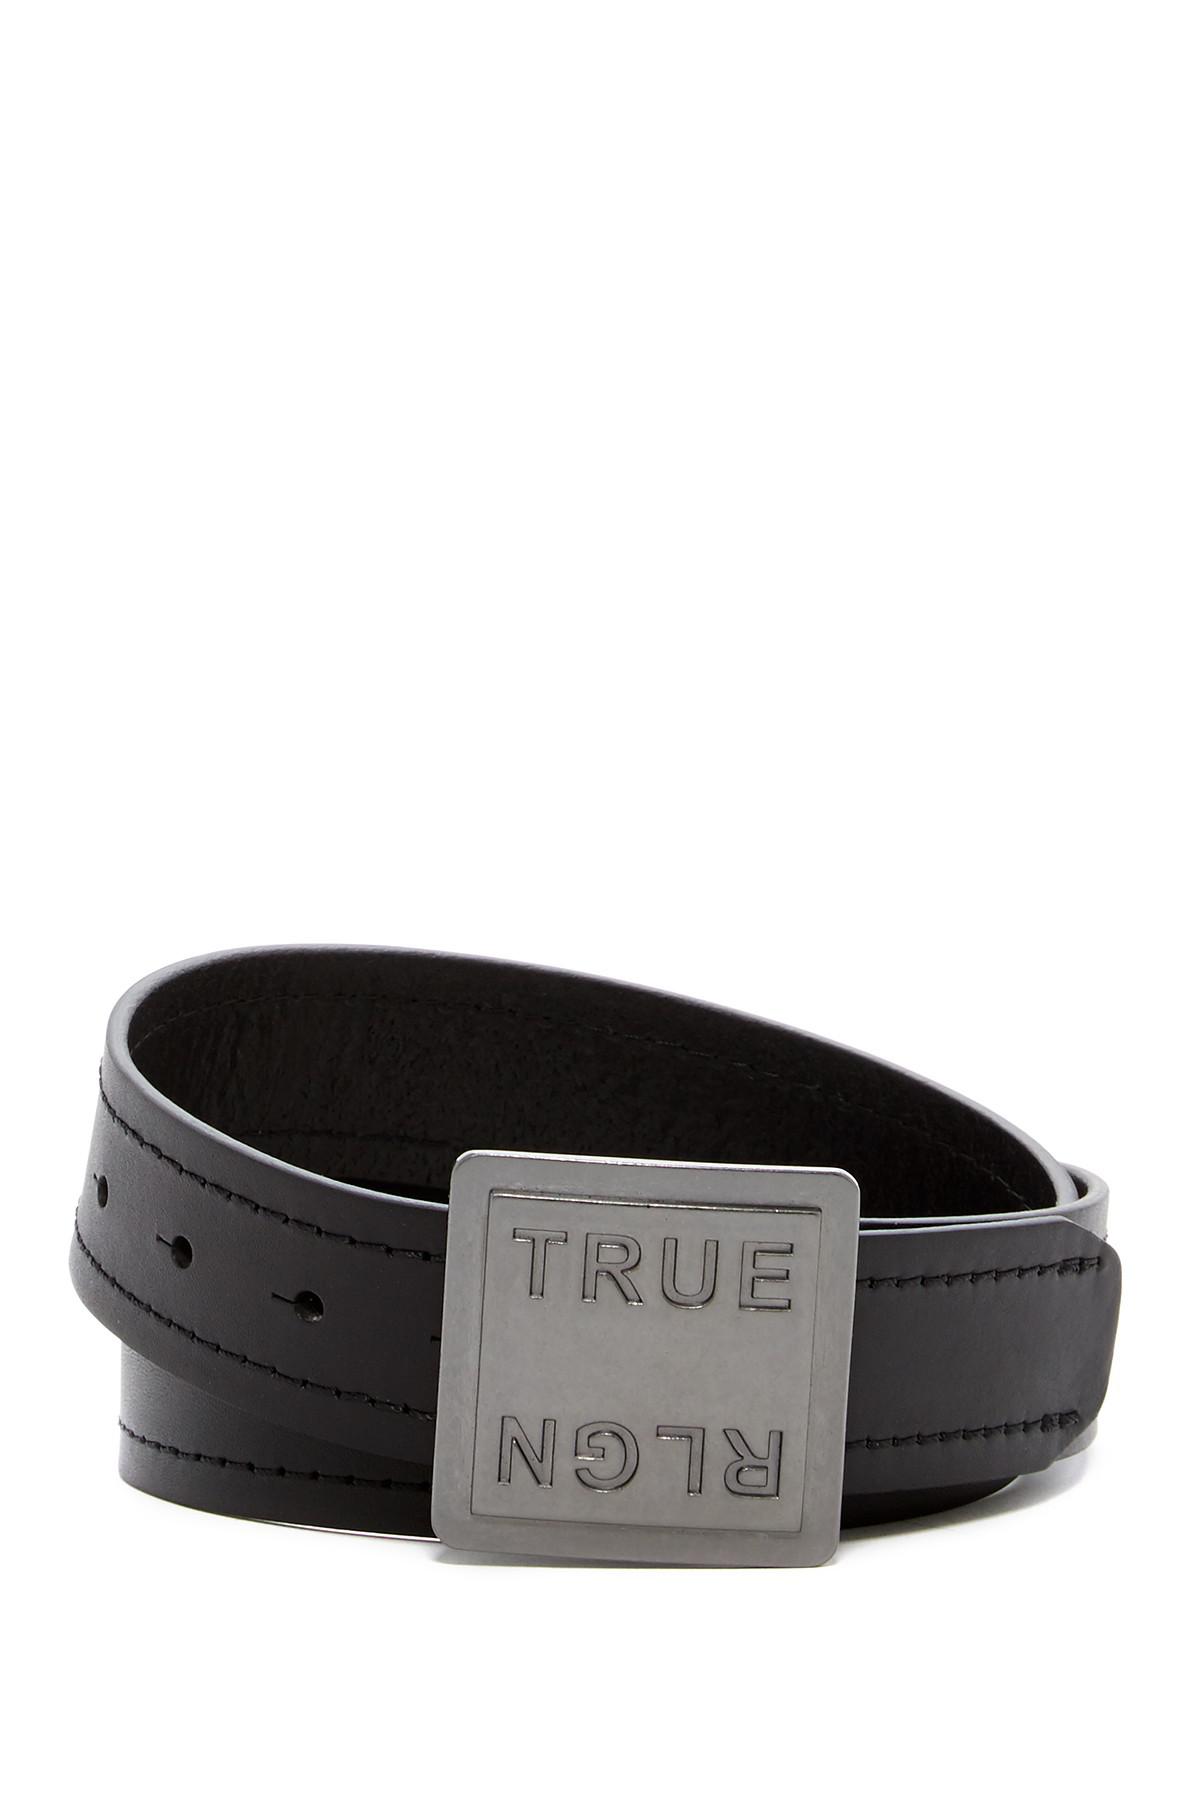 Lyst - True Religion 38mm Stitched Bridle Leather Belt in Black for Men